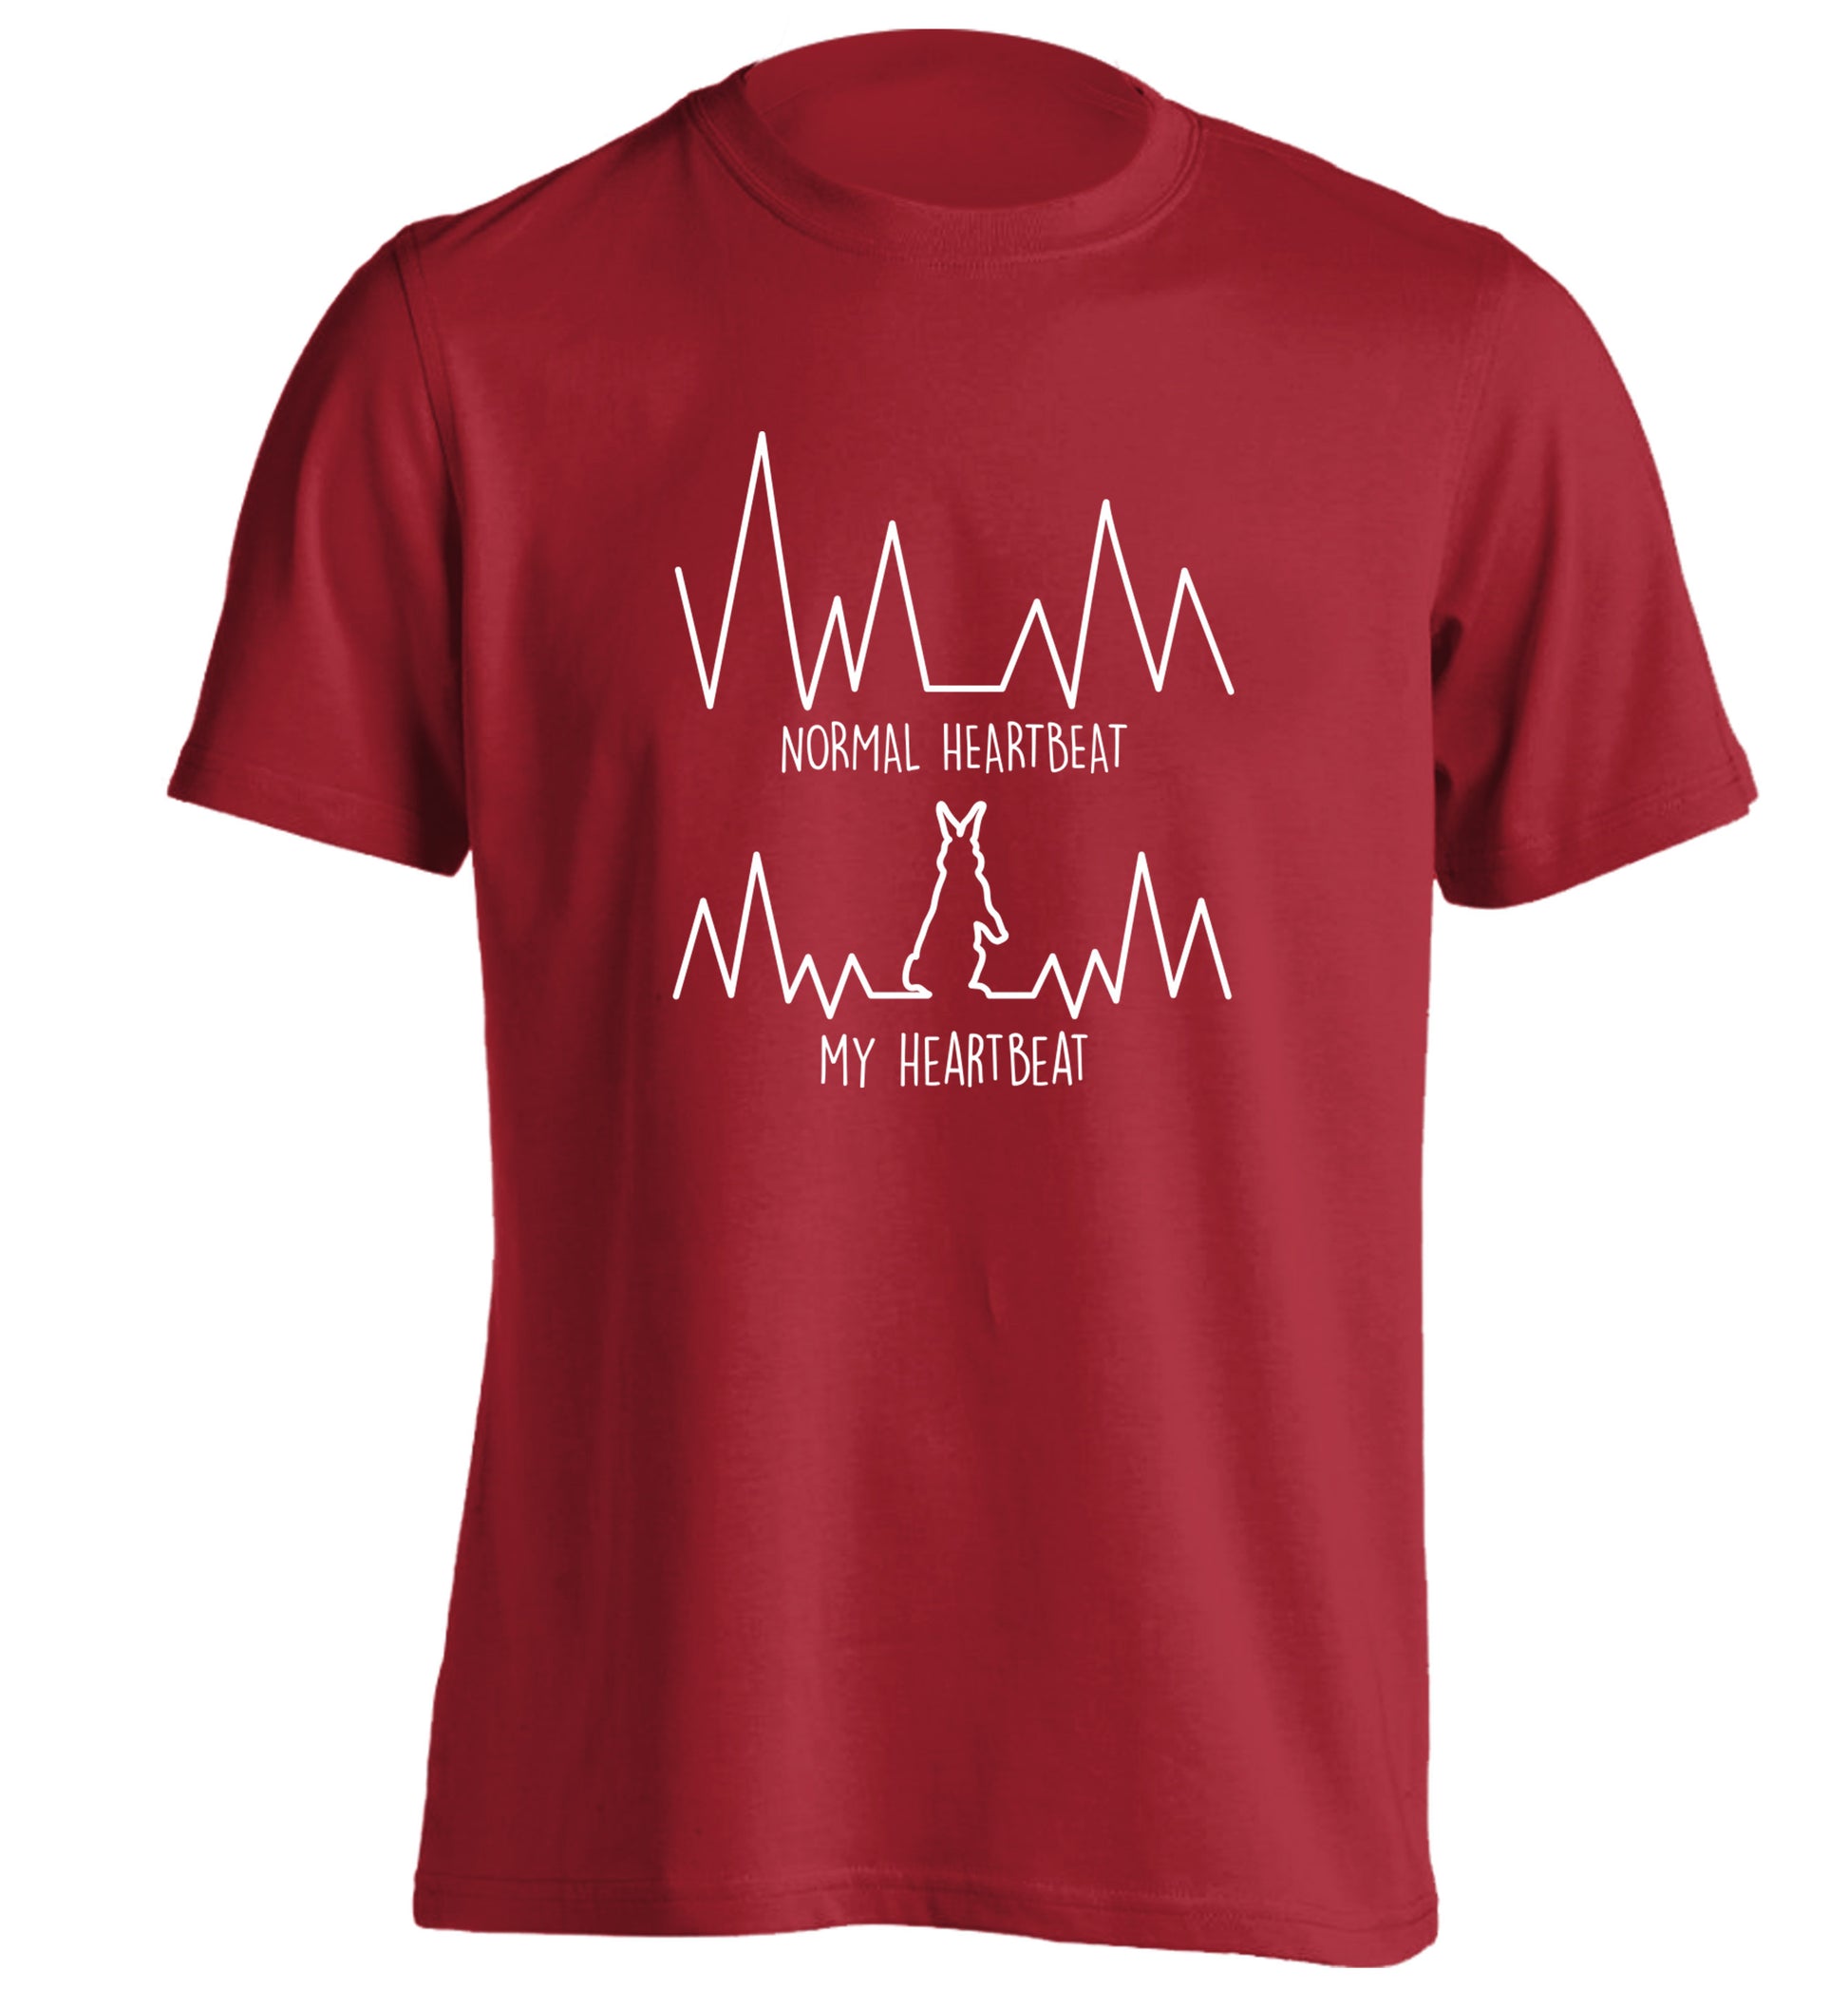 Normal heartbeat, my heartbeat rabbit lover adults unisex red Tshirt 2XL